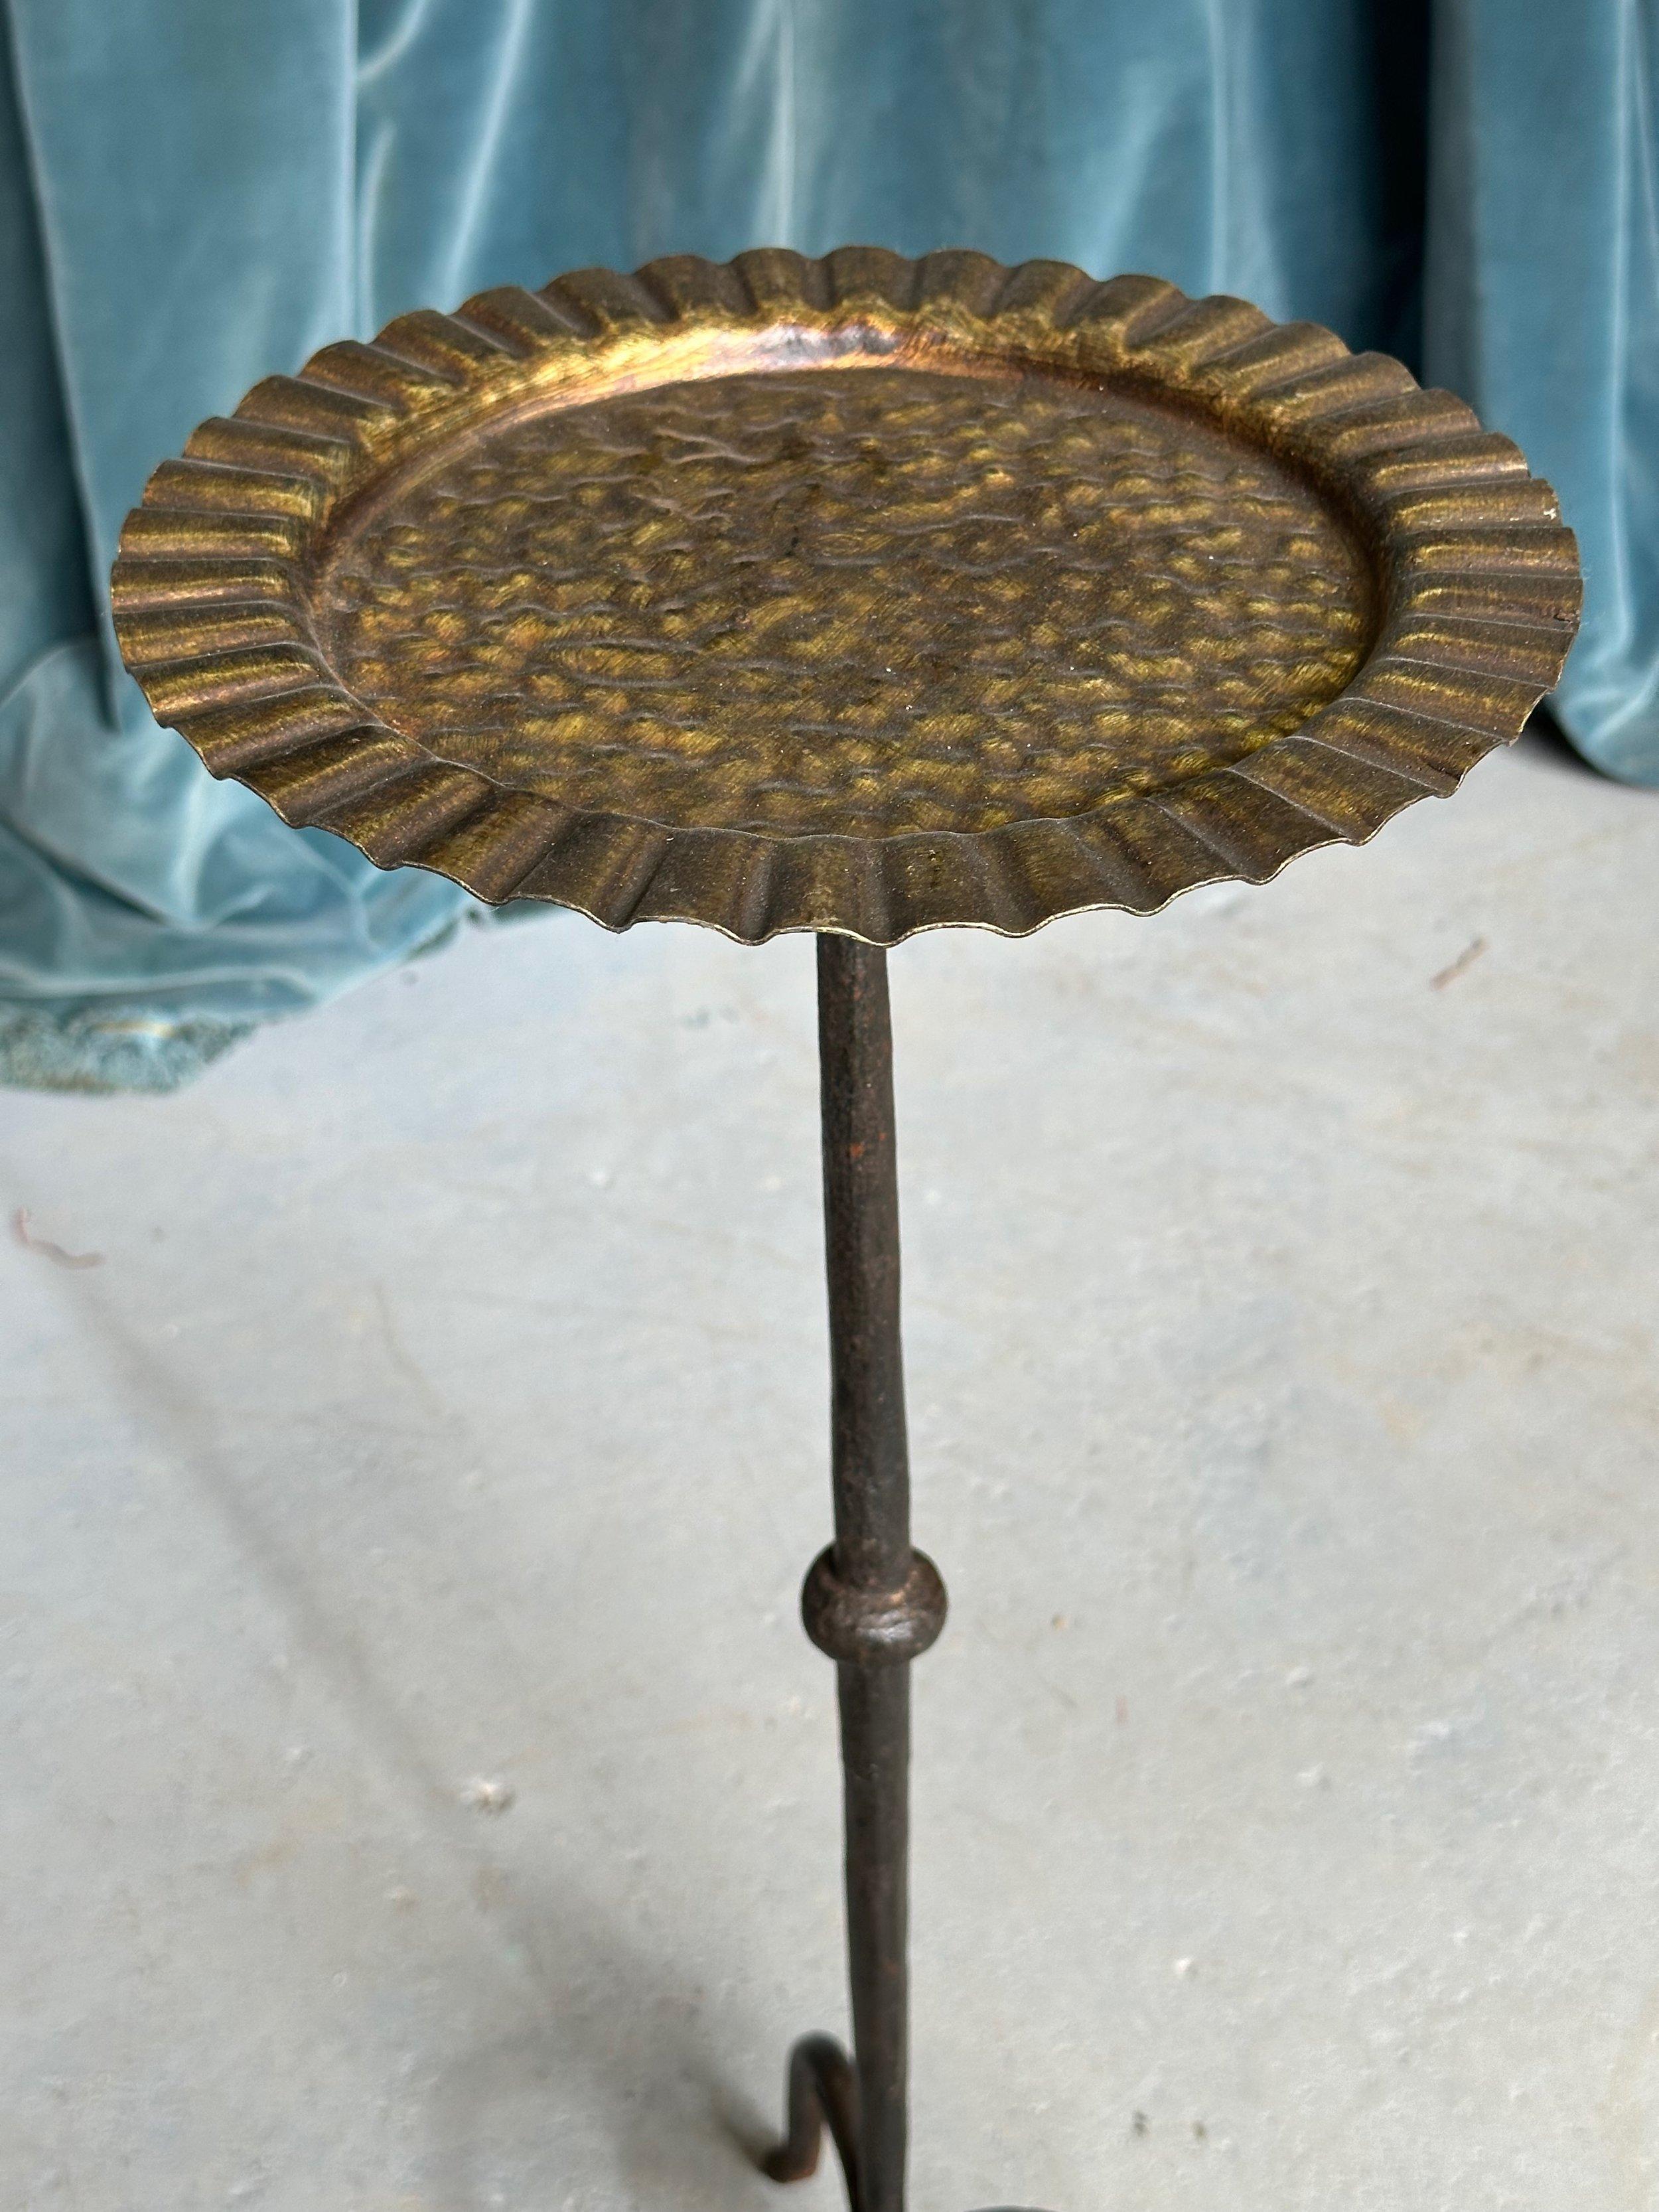 Contemporary Ornate Gilt Metal Drinks Table With a Ruffled Top For Sale